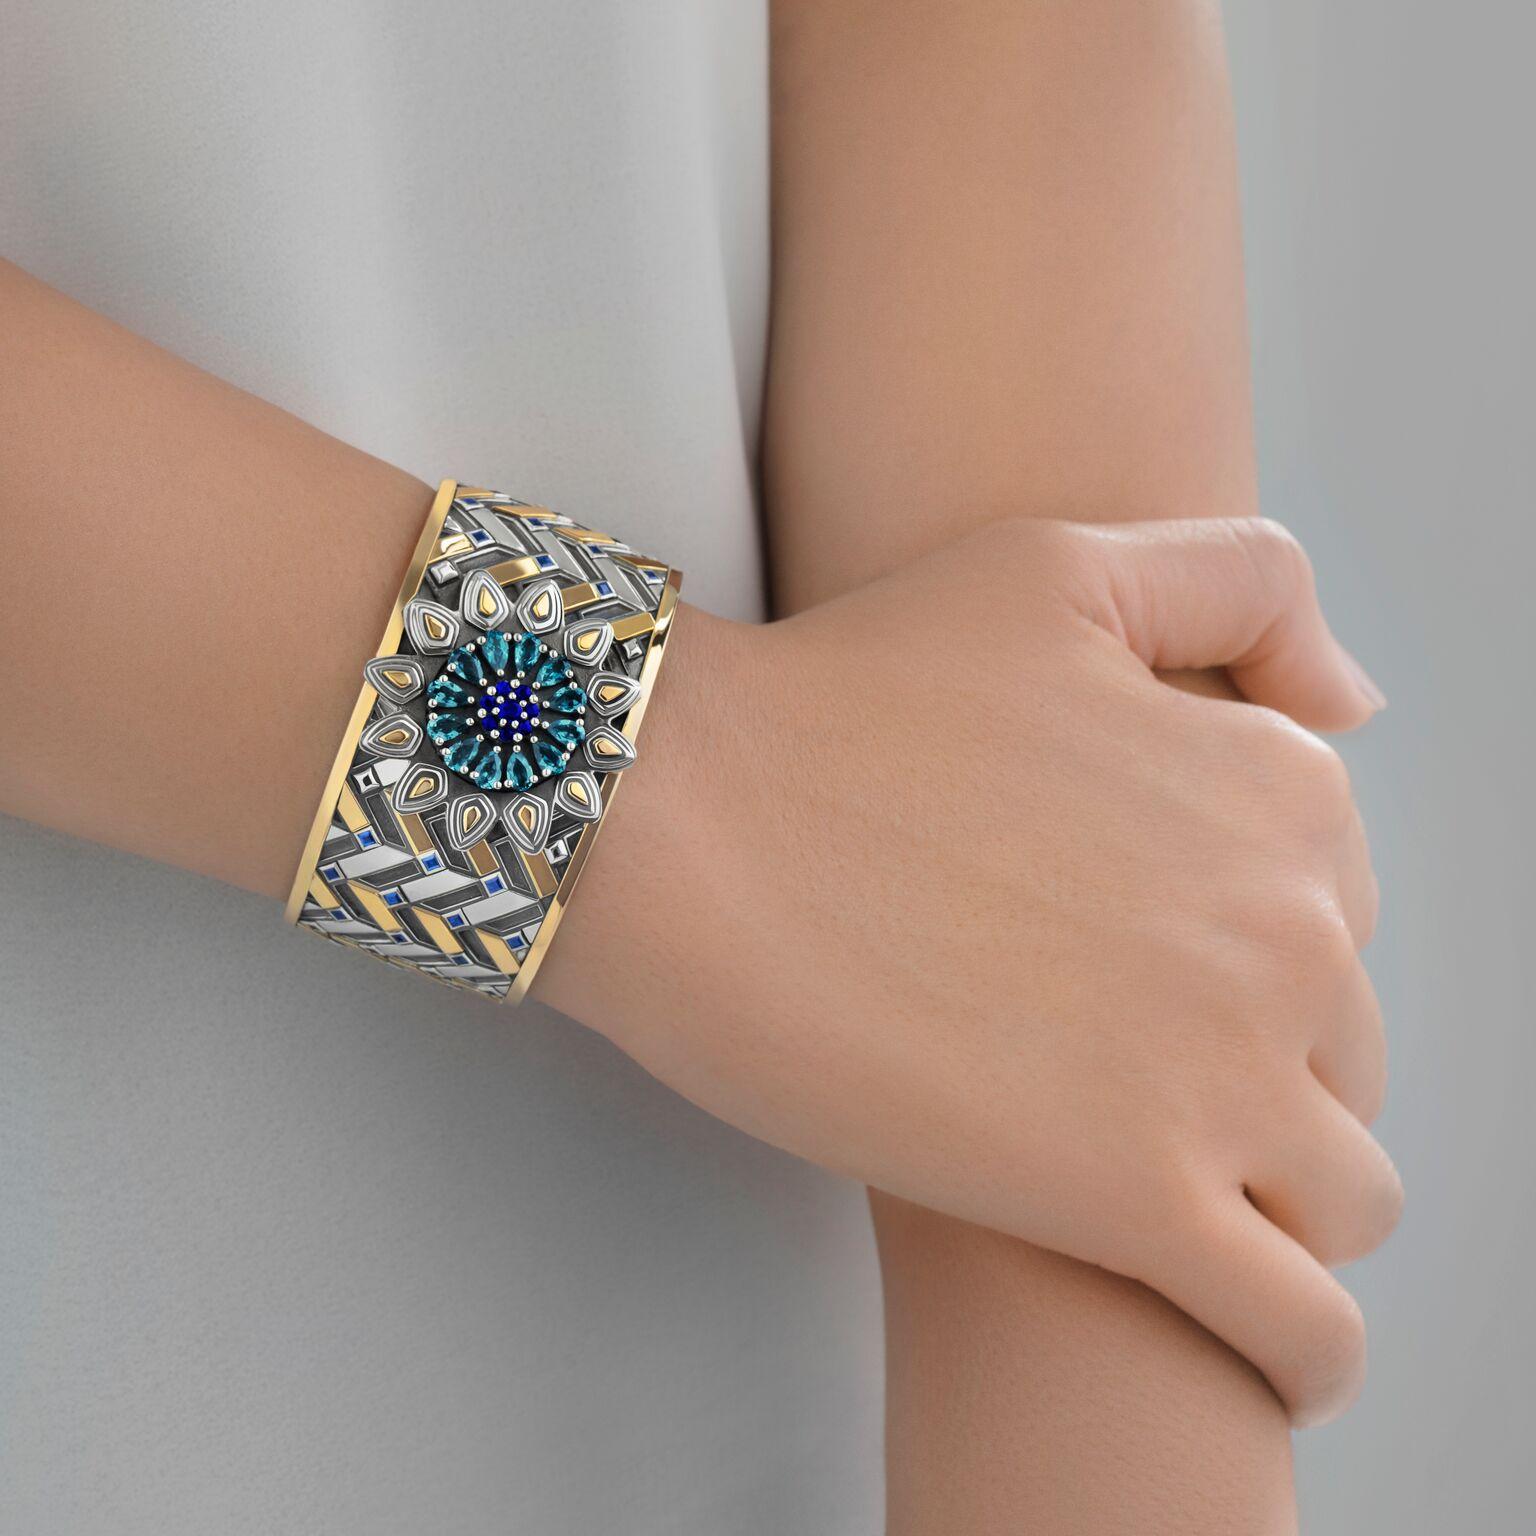 Sterling Silver, 18 Karat Yellow Gold, 2.33 carat Sapphire and 4.50ct London Blue Topaz Qalawun-Muzhir Bangle inspired by the Mamluk period in Medieval Egyptian History.

The Qalawun-Muzhir Bangle brings together two design compositions: the first